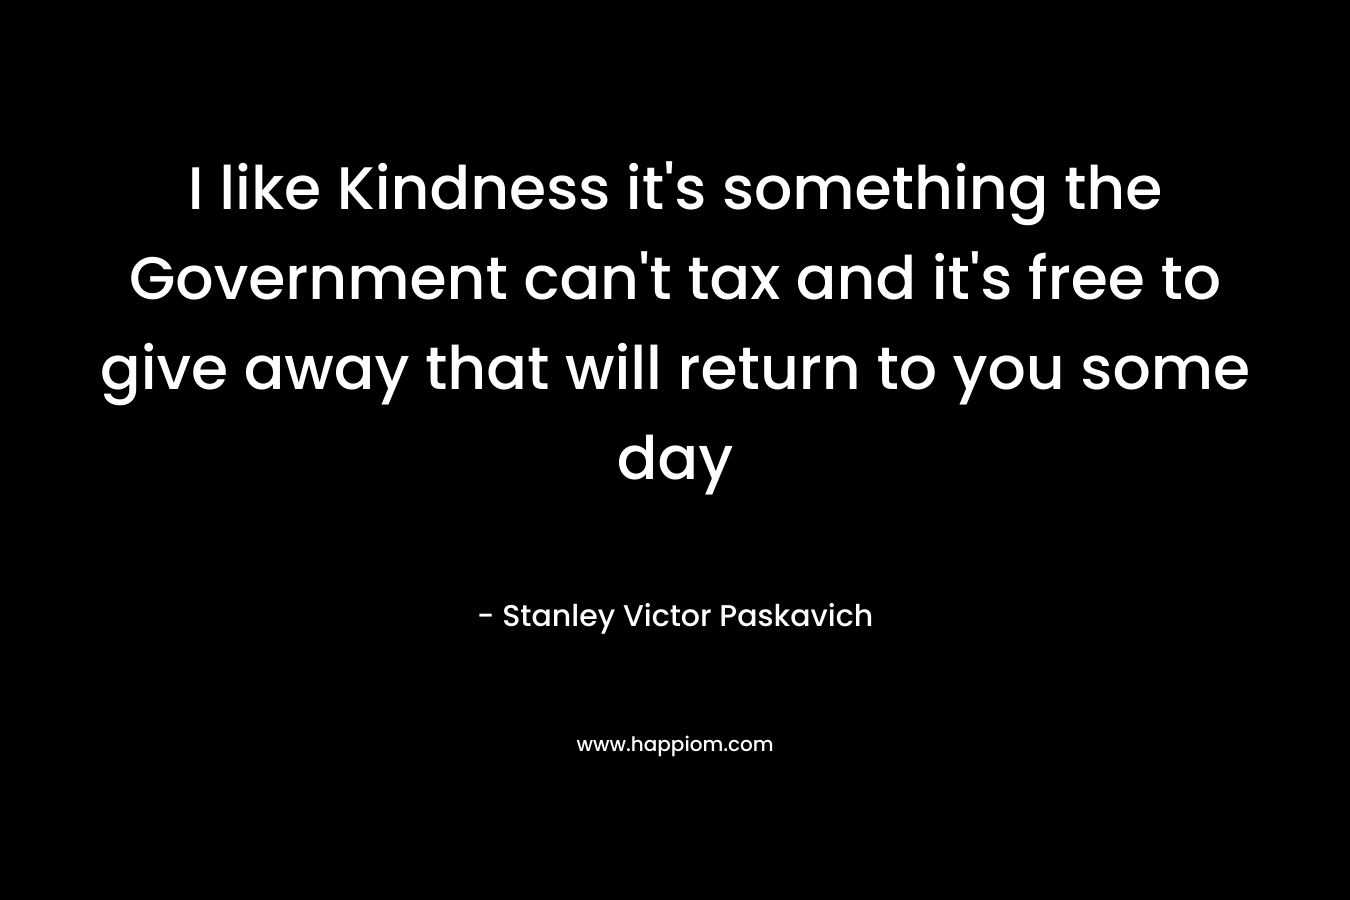 I like Kindness it's something the Government can't tax and it's free to give away that will return to you some day